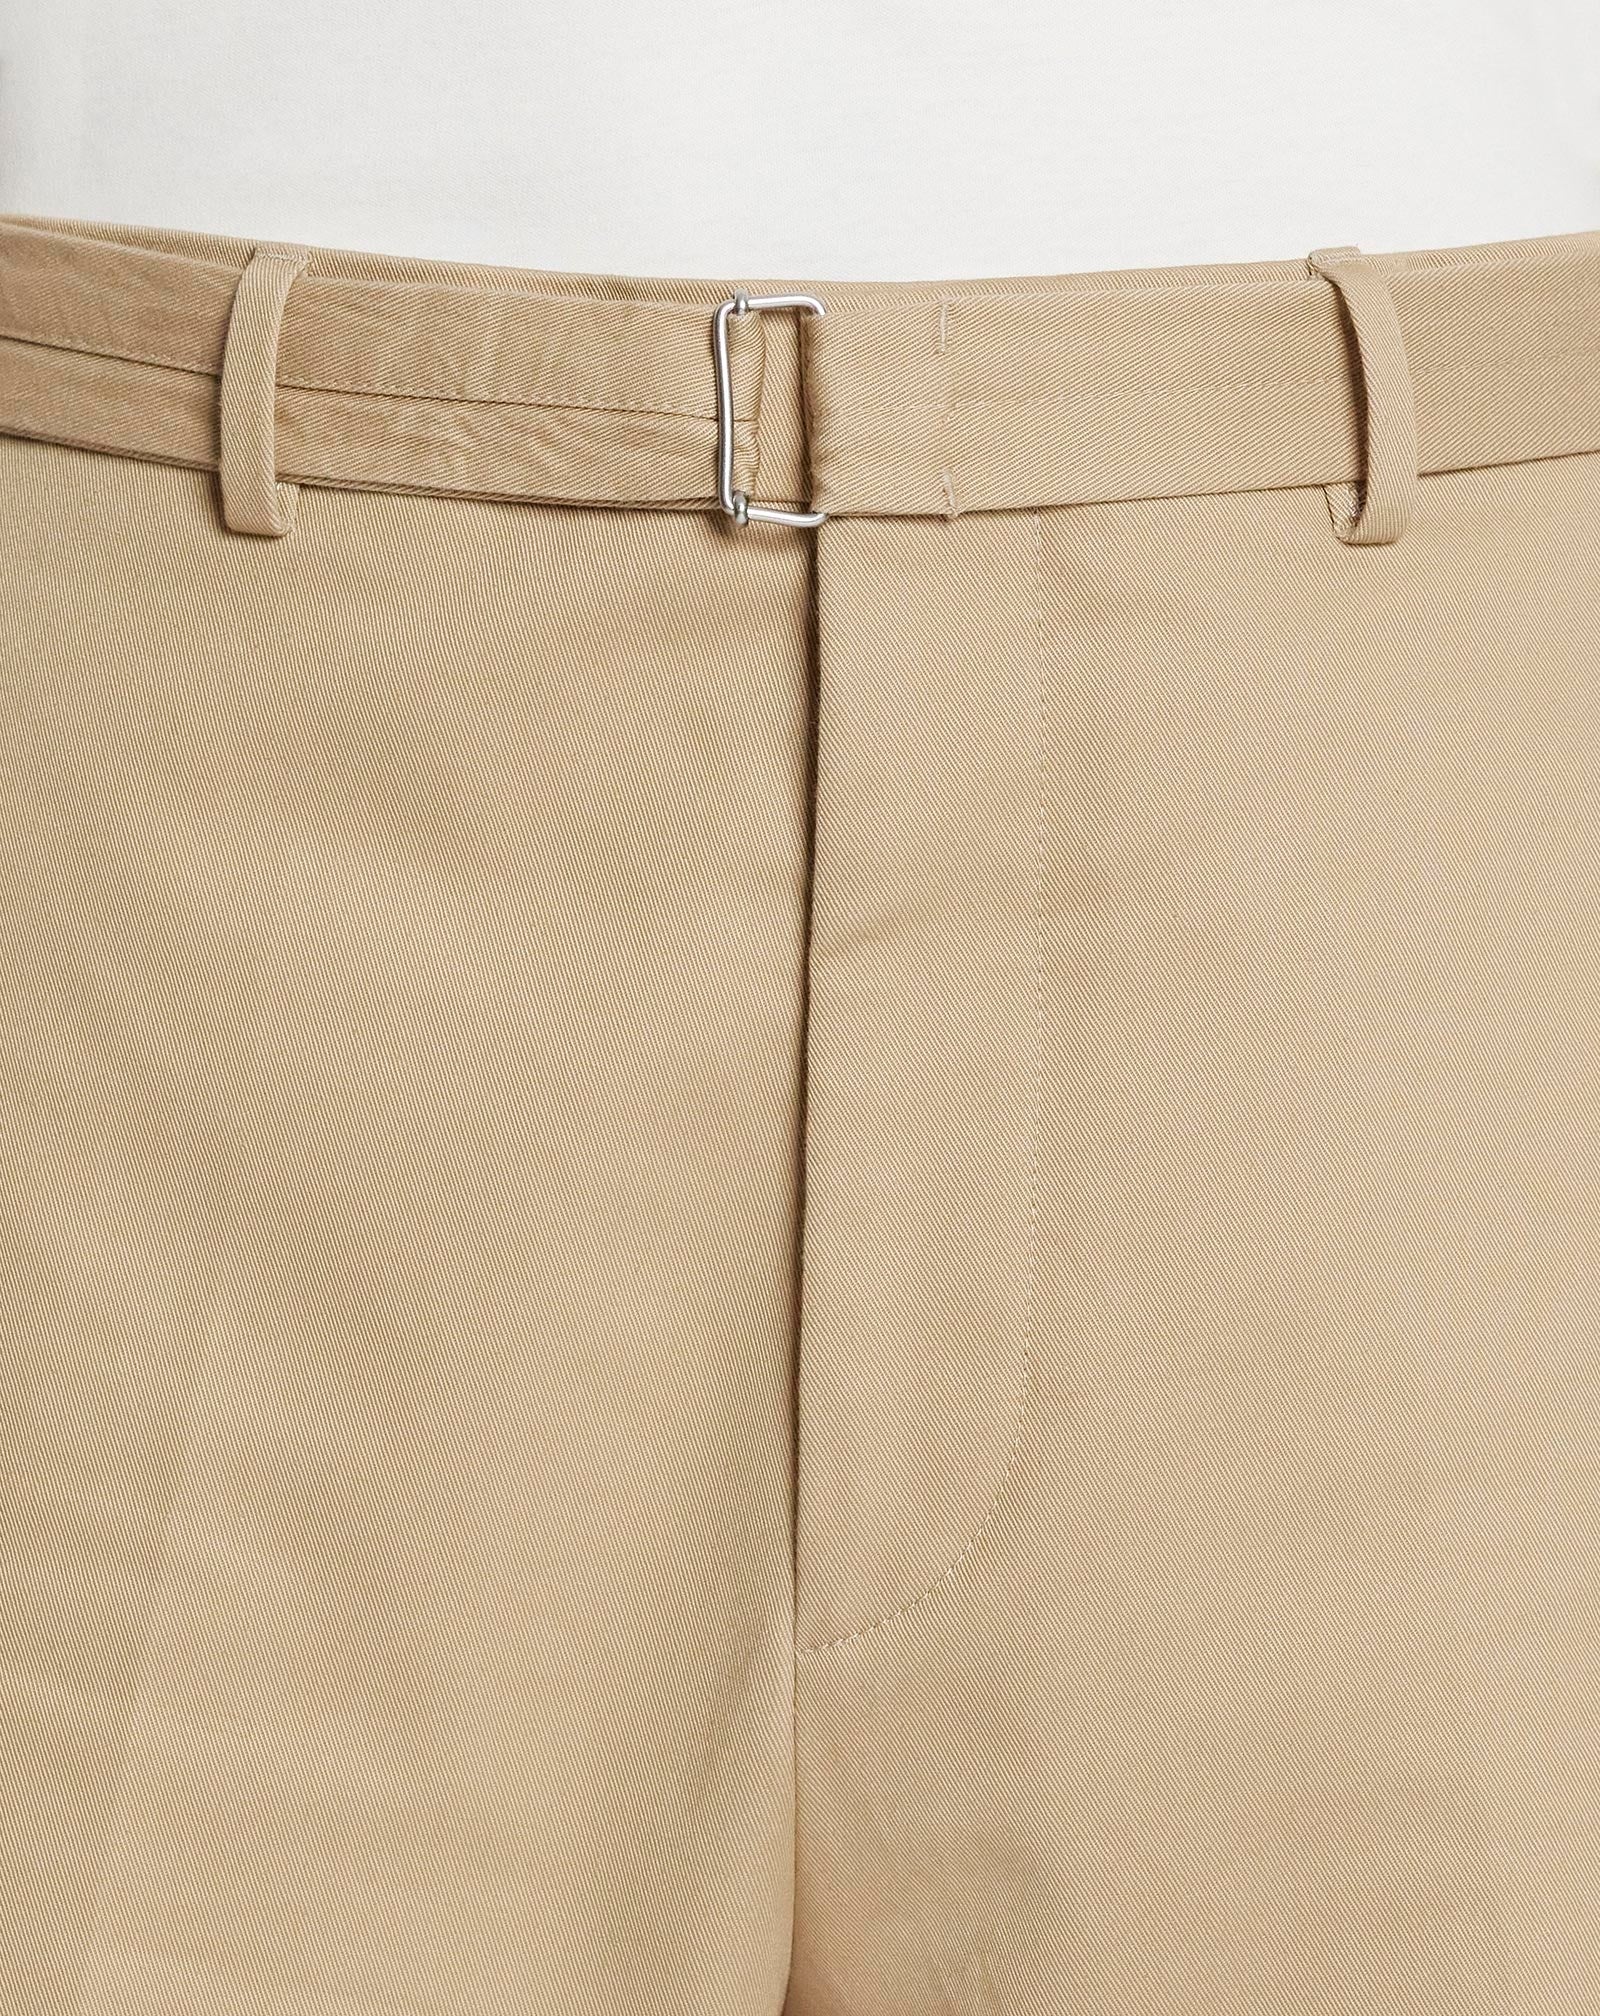 TAILORED SHORTS WITH RAW HEM DETAILS - 5